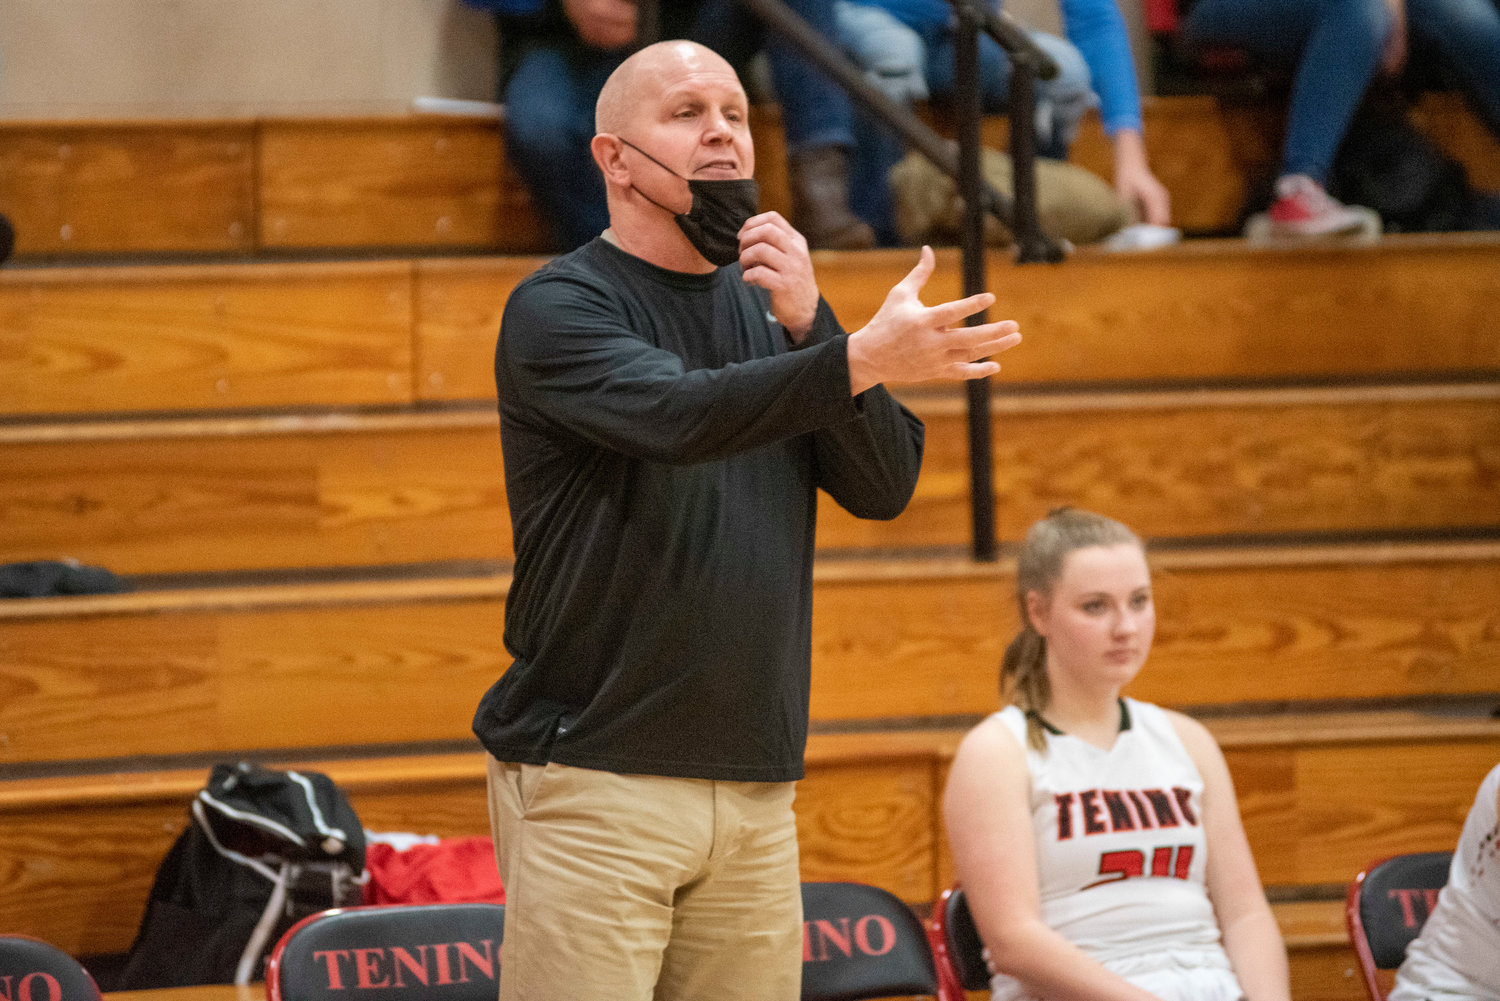 Tenino girls basketball coach Scott Ashmore calls out instructions to his team during their 2021-22 season opener against Rochester on Dec. 2, 2021.